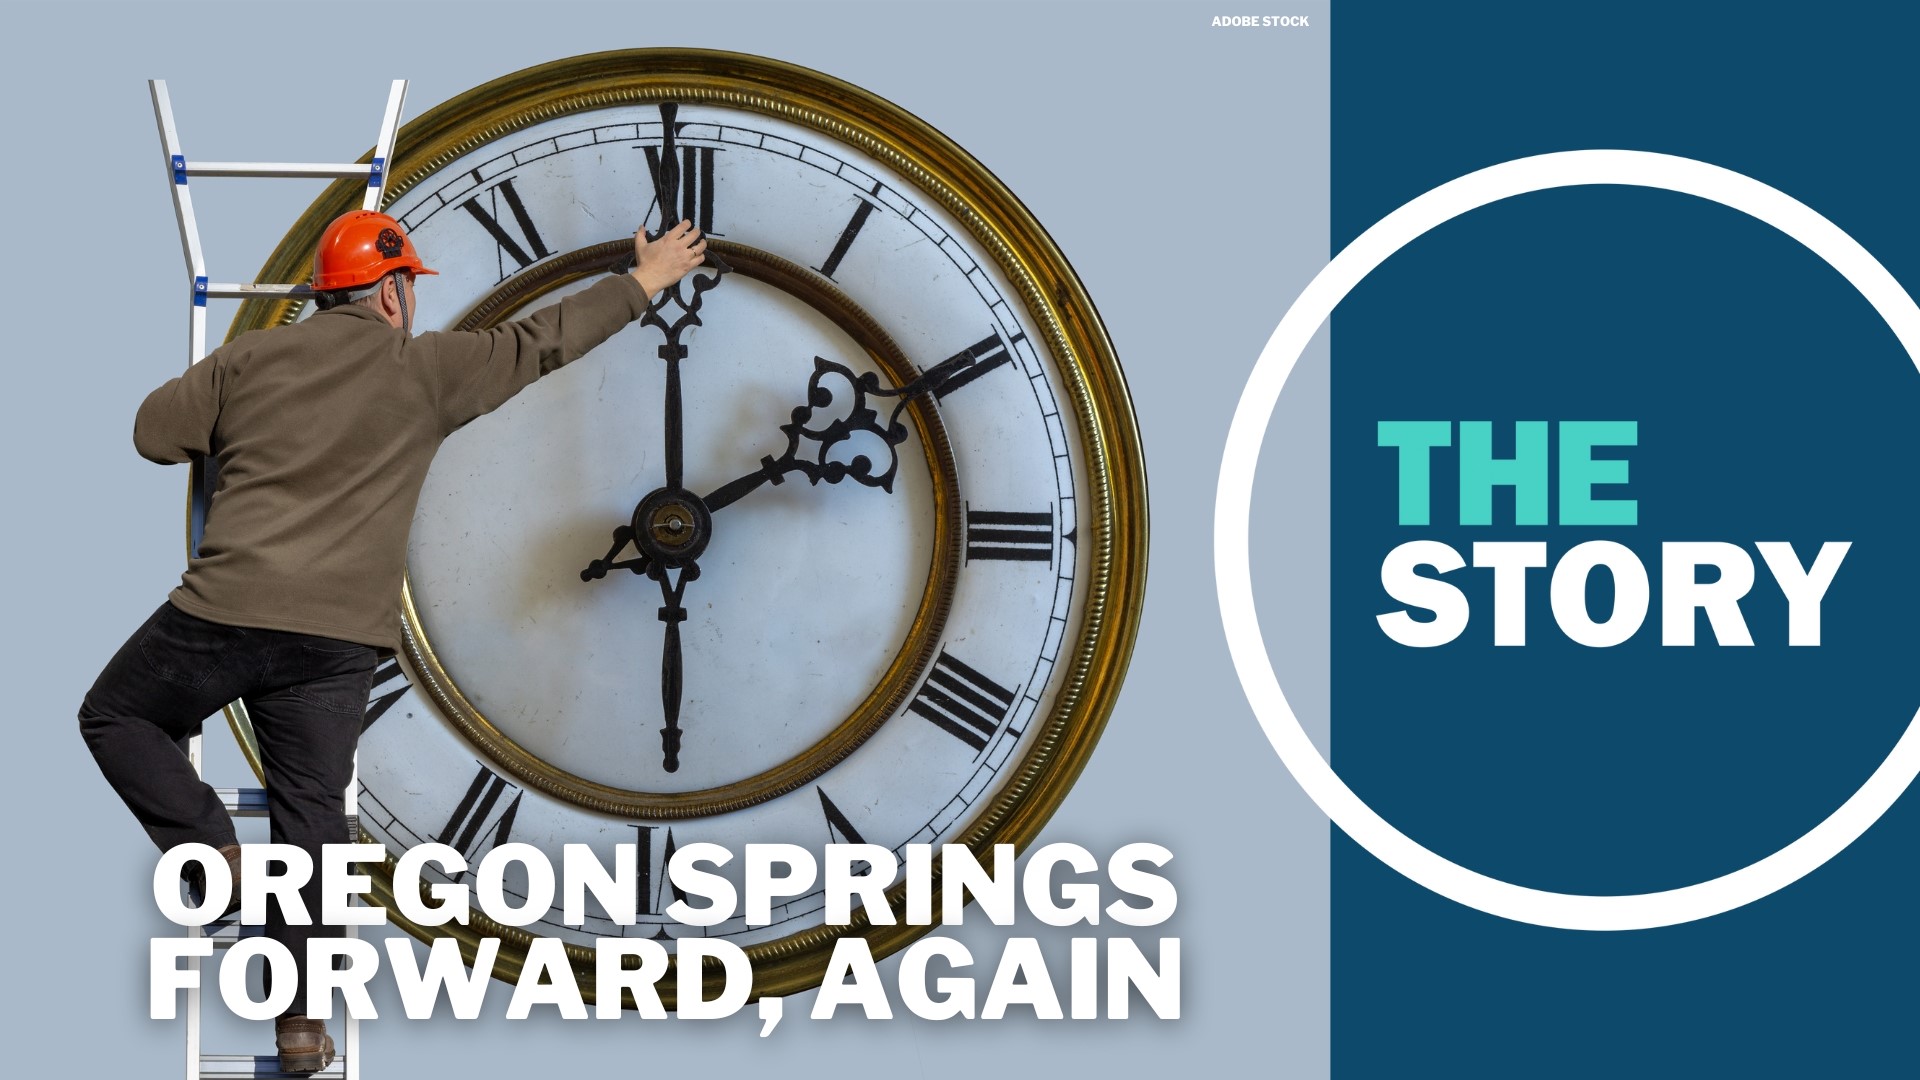 Oregon lawmakers voted for permanent daylight saving time in 2019, and the bill was signed into law. So why are we still setting clocks back?